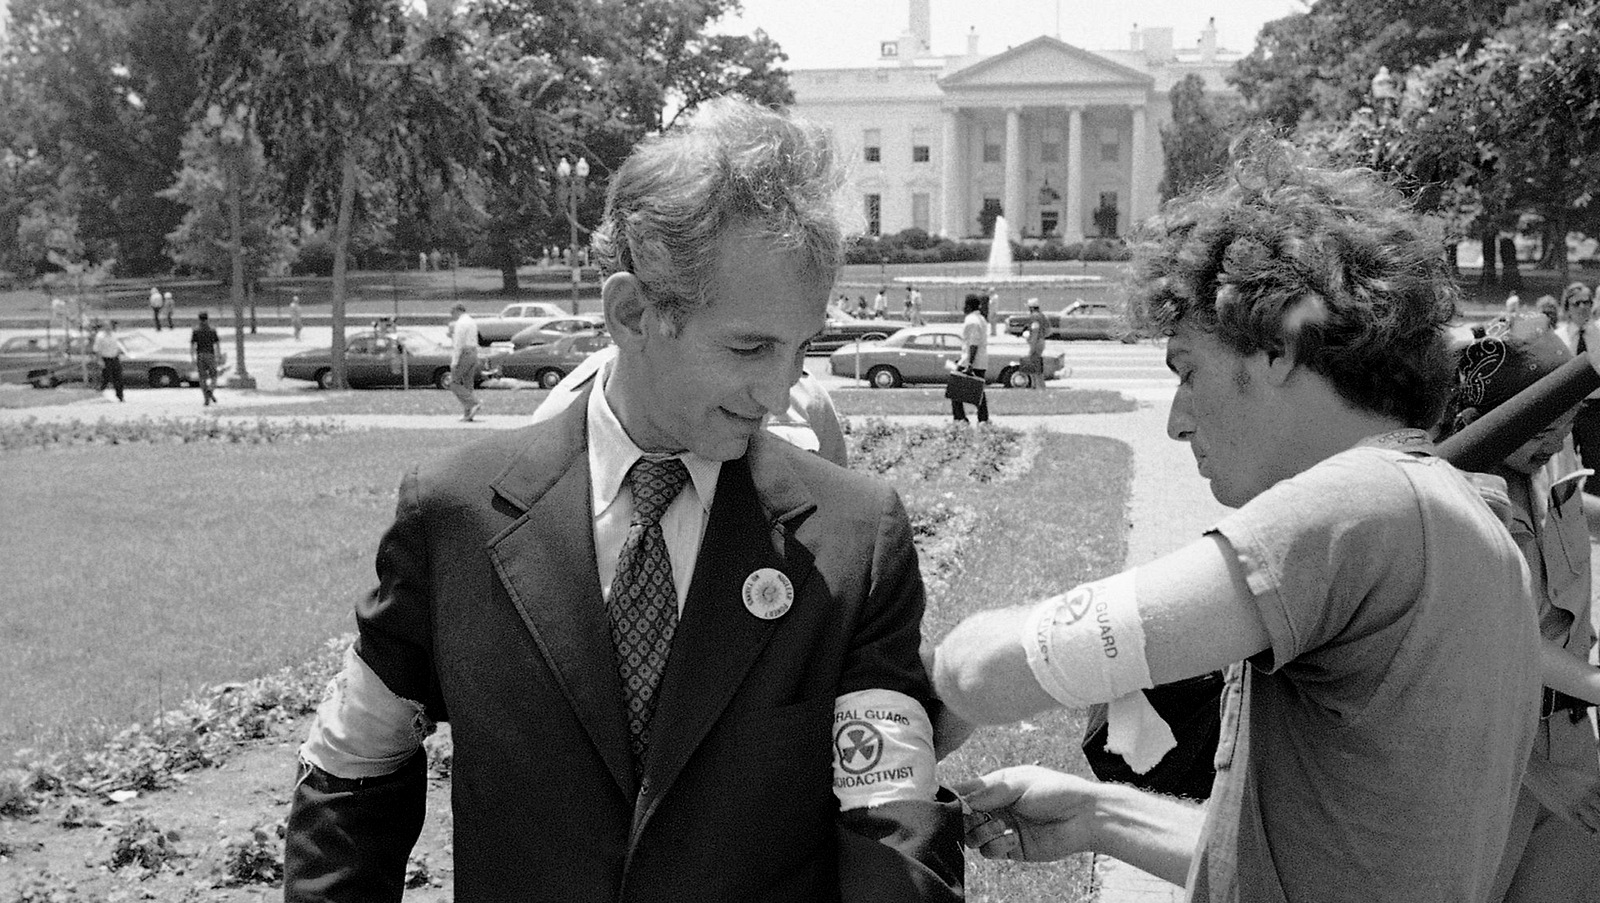 Daniel Ellsberg is given an armband by a protester in Lafayette Park, Washington in front of the White House, while attending an anti-nuclear protest, June 28, 1978. (AP Photo/Jeff Taylor)